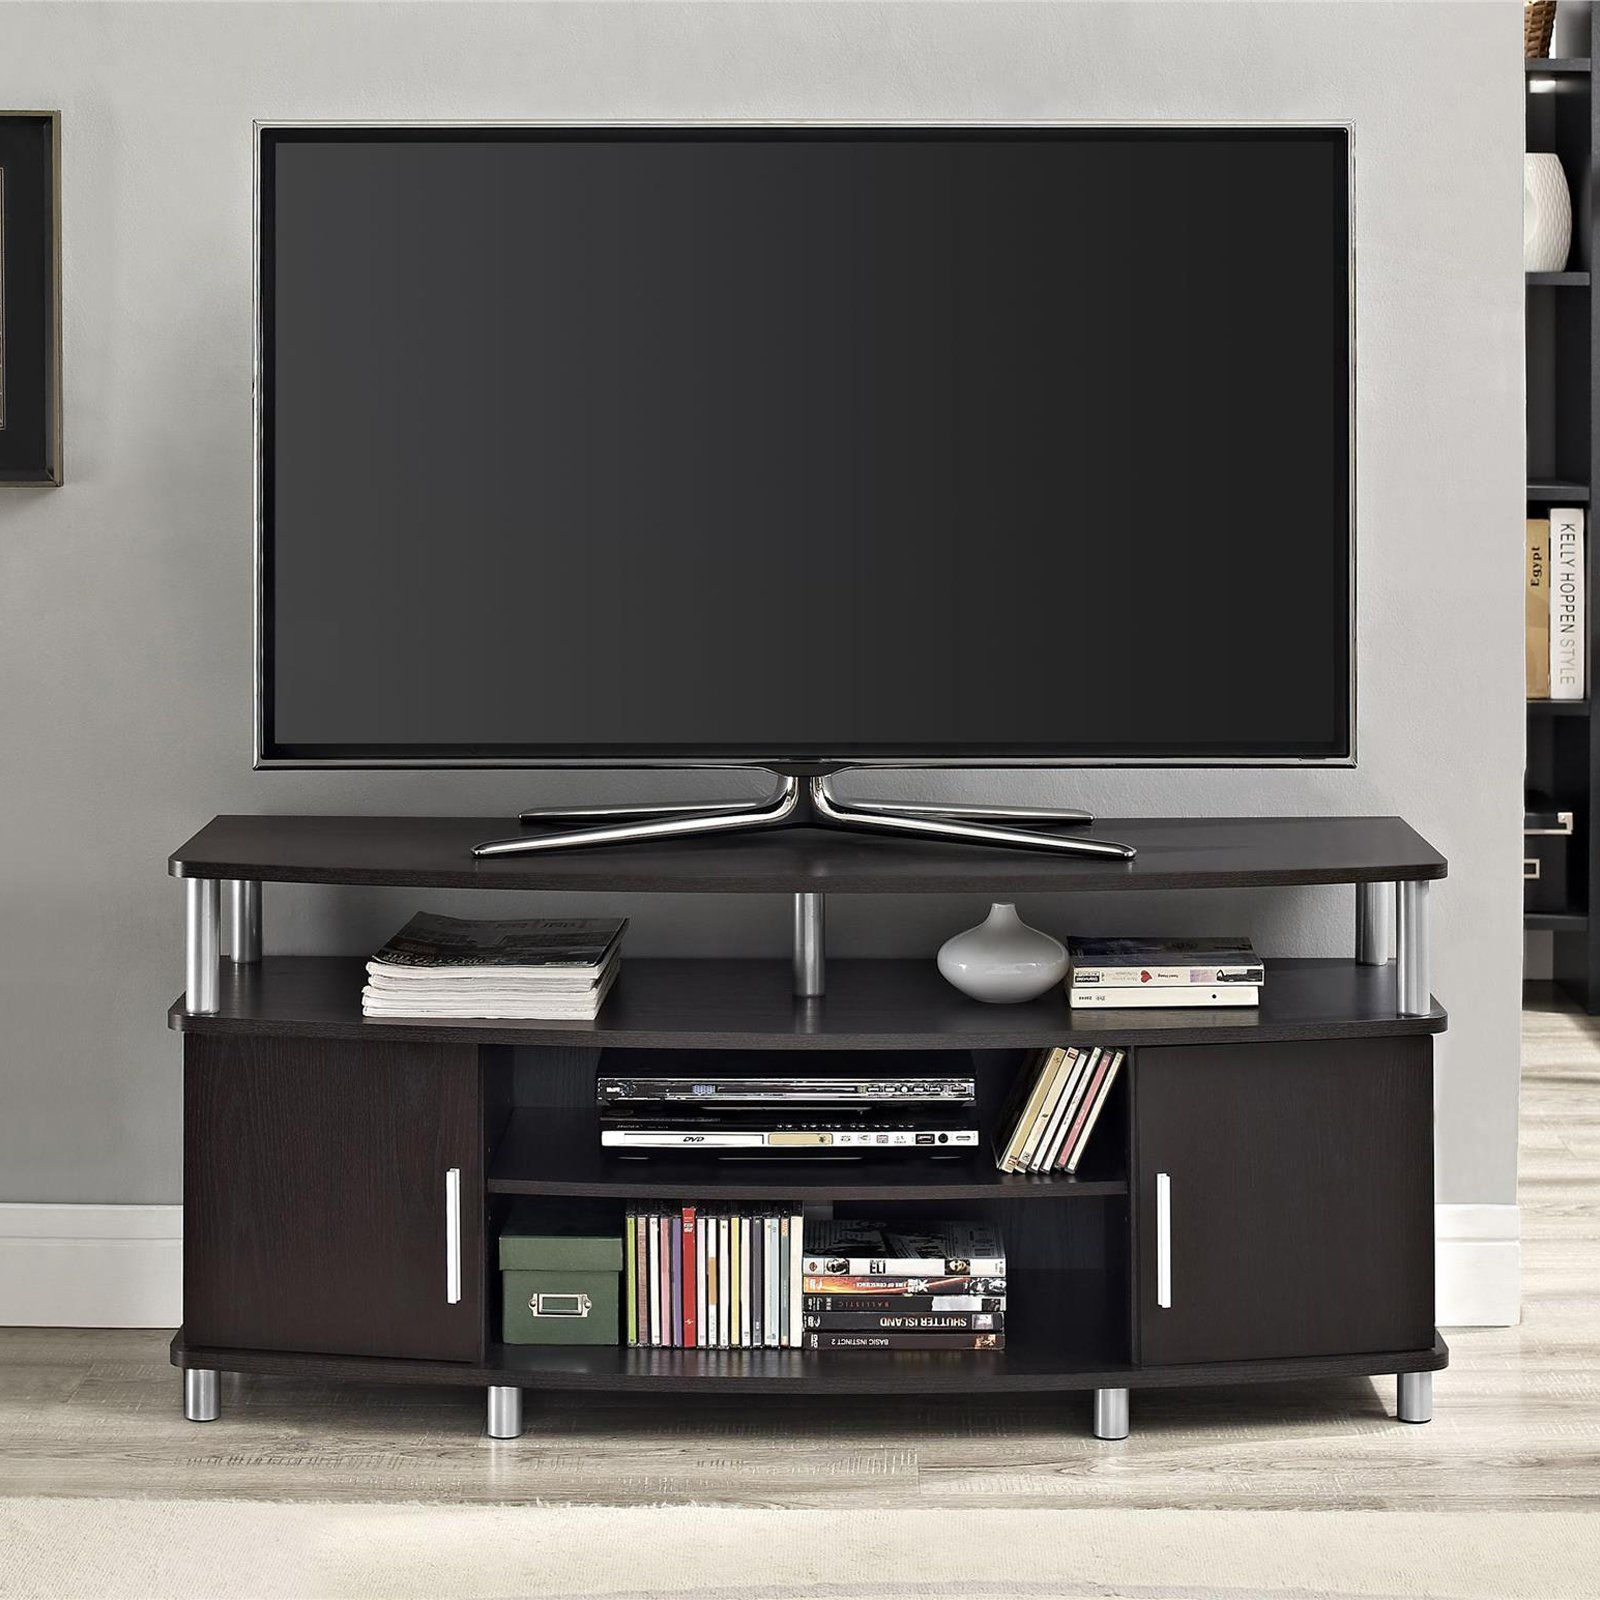 Smart Hd Tv Stand 50 Inch Digital Low Profile Small Throughout Small Tv Stands (View 2 of 15)